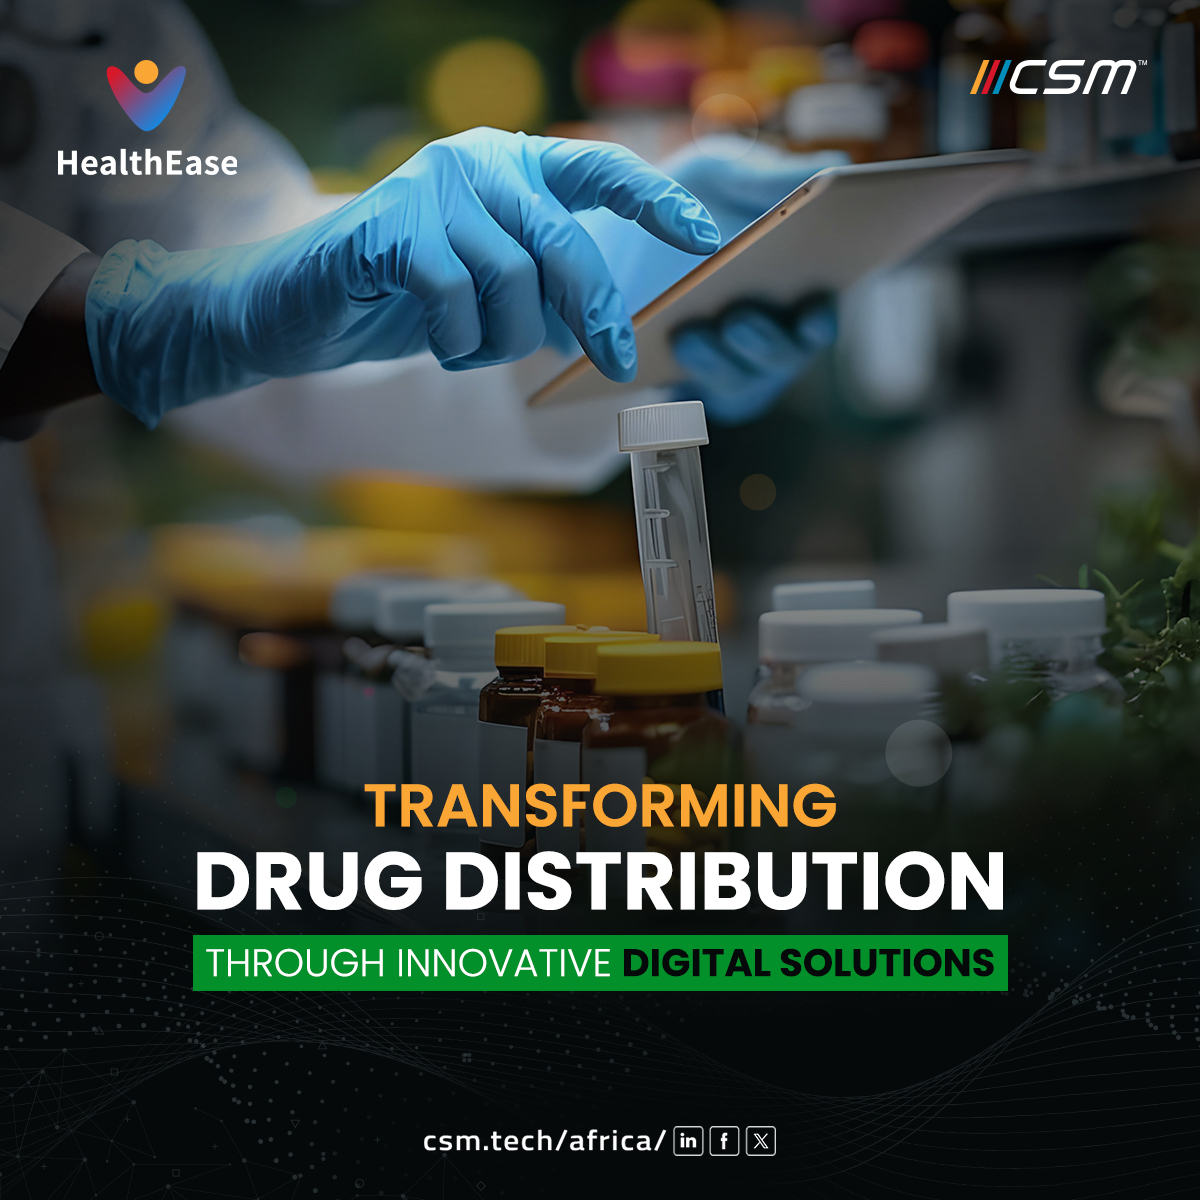 From procurement to delivery, we're transforming the pharmaceutical supply chains. 

👉Learn more: bit.ly/3WtMJUt 

#CSMTech #CSMTechAfrica #HealthTech #DigitalHealthcare #DrugDistributionSystem #SupplyChain